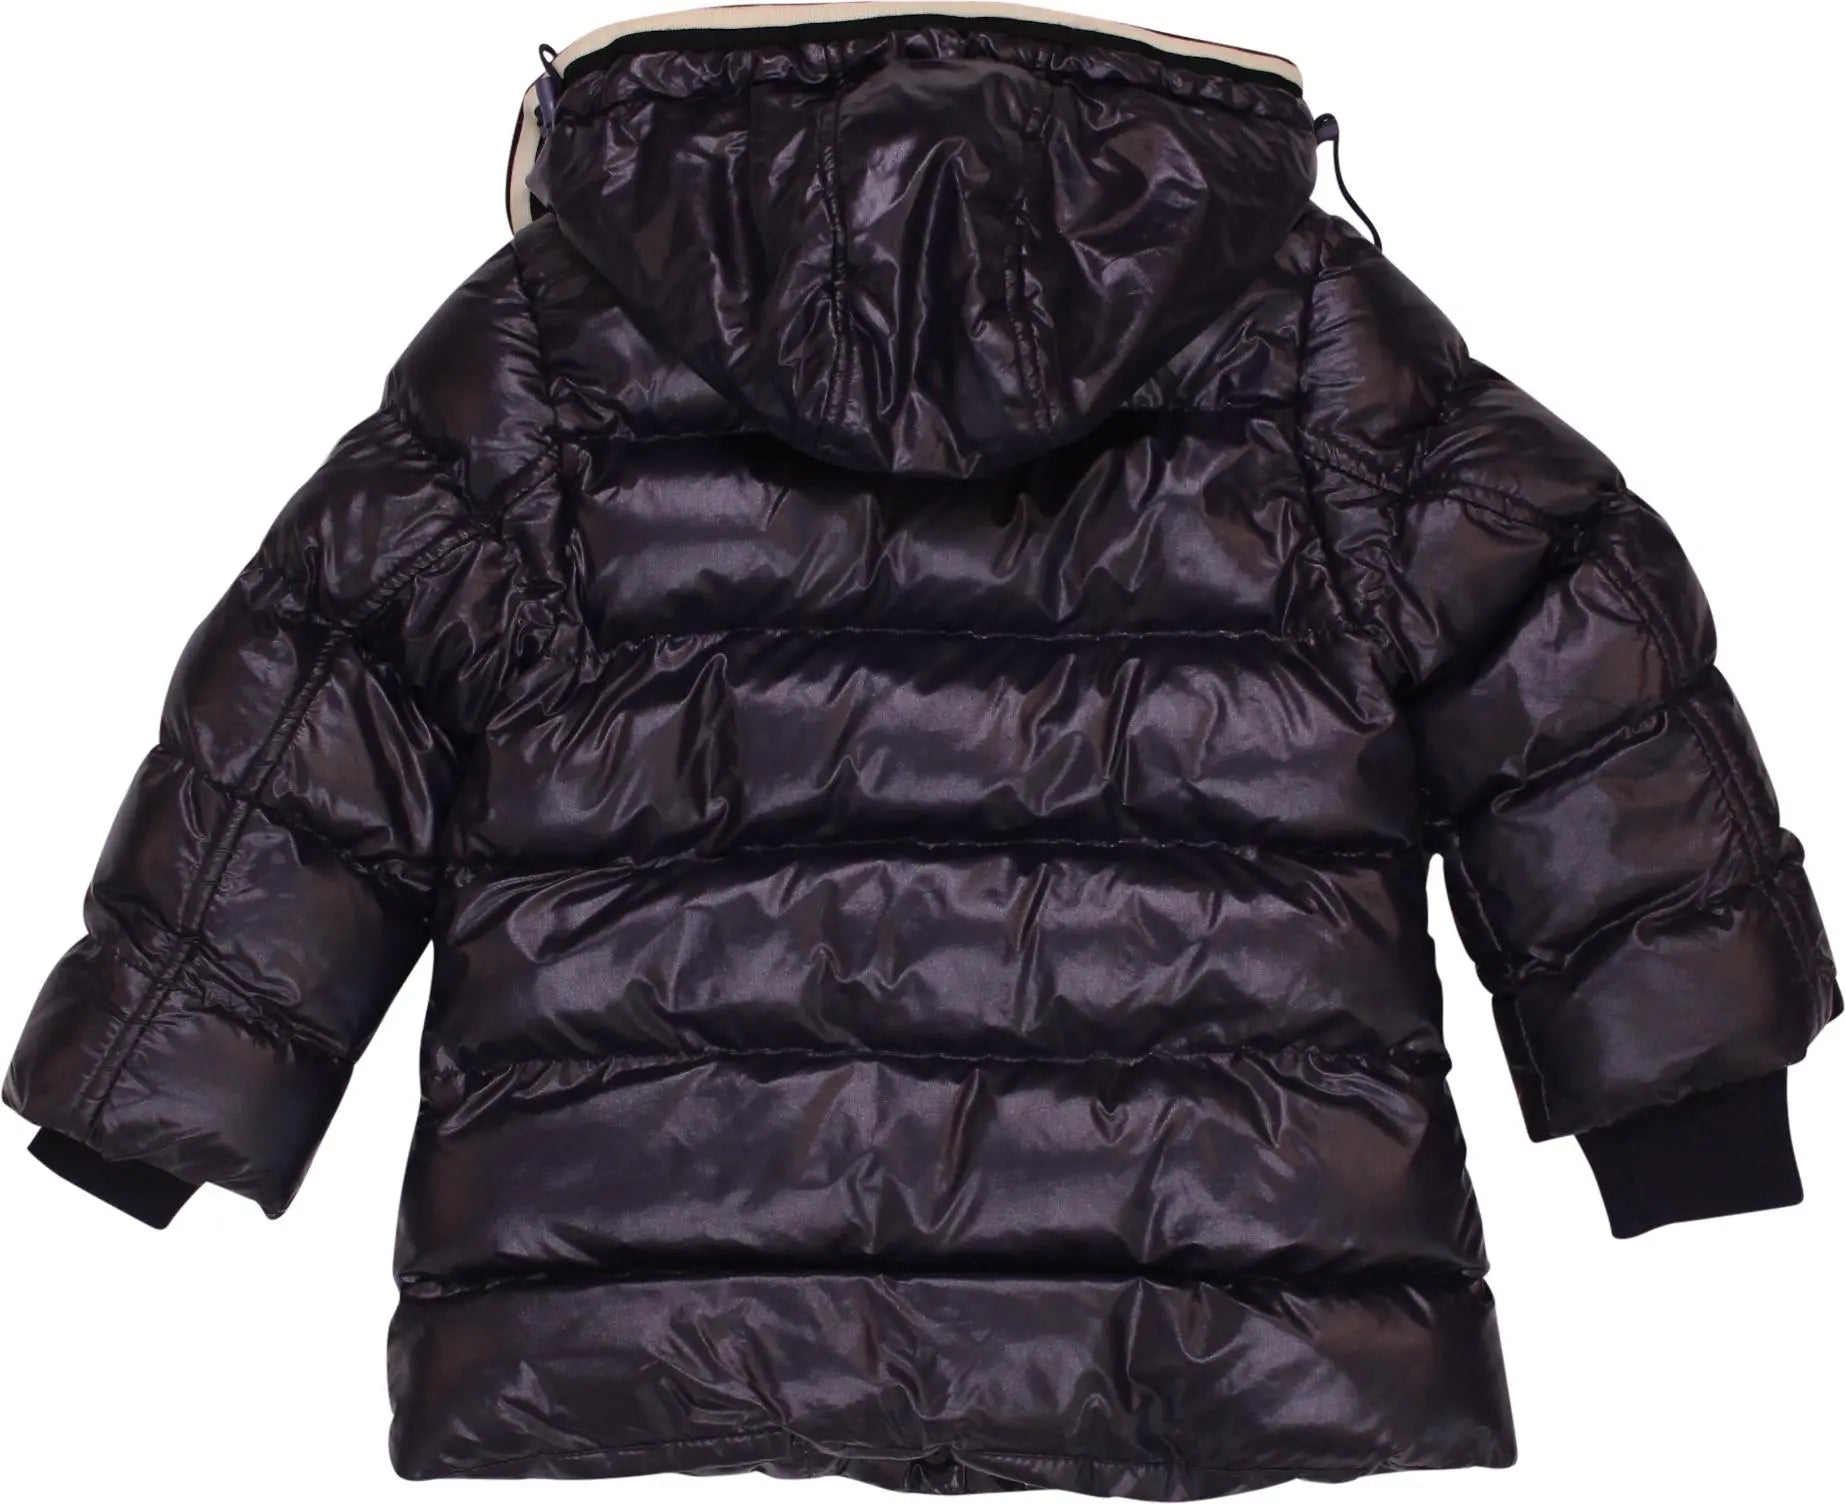 Moncler - Winter Coat by Moncler- ThriftTale.com - Vintage and second handclothing